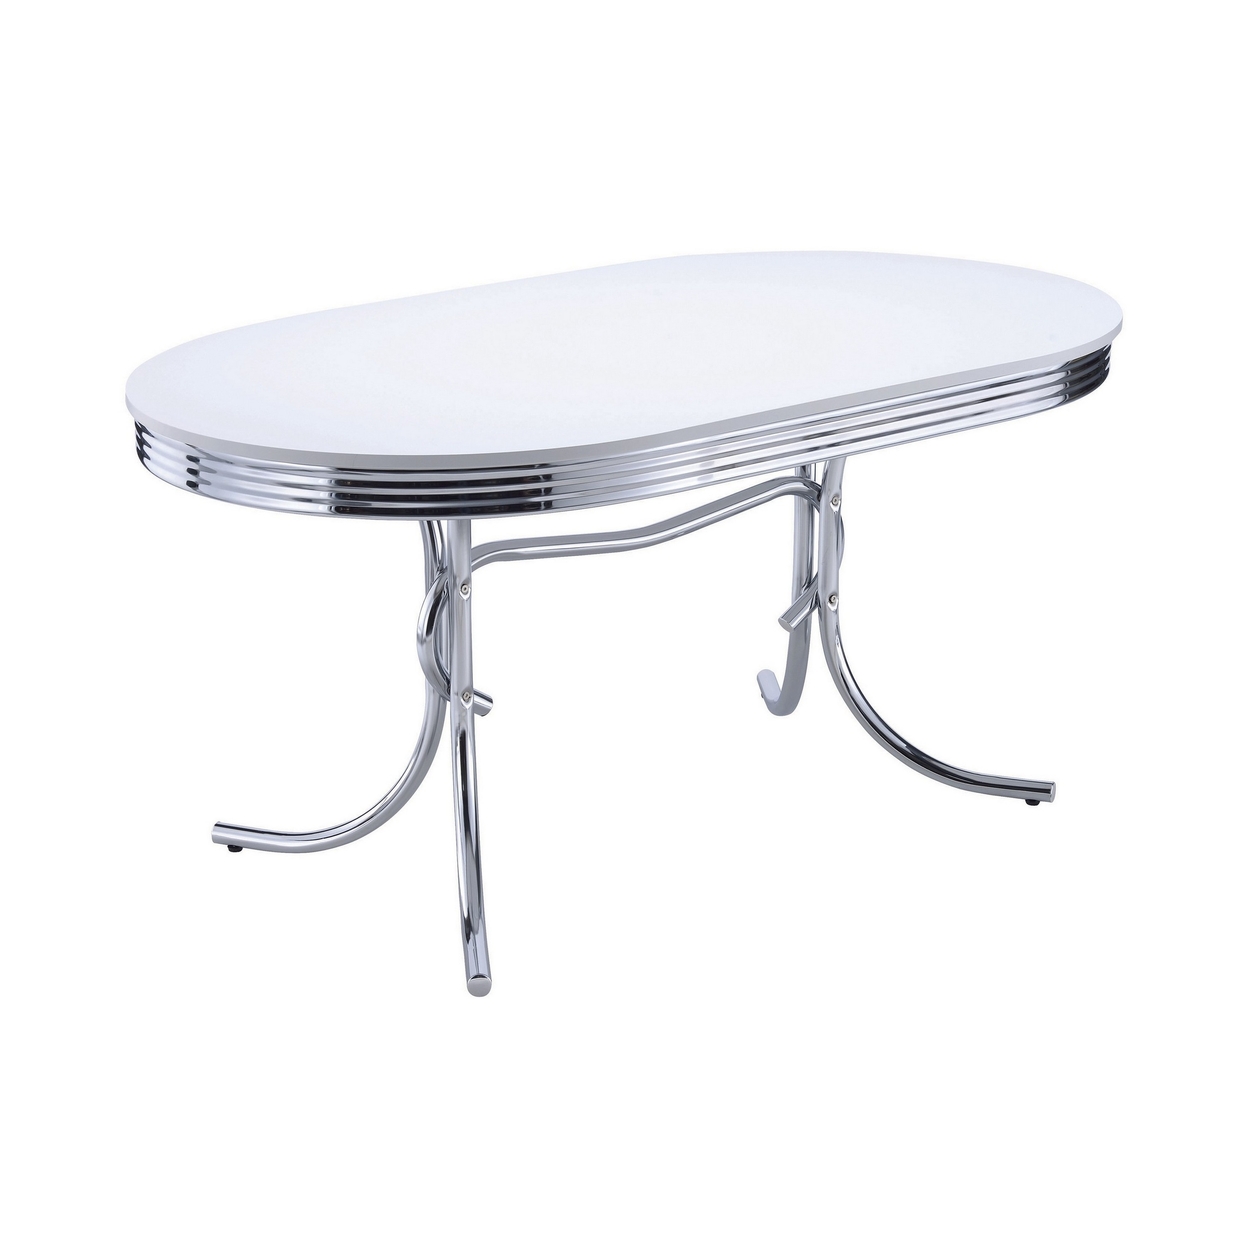 Loy 60 Inch Oval Dining Table, Glossy White Wood Top, Ribbed Chrome Apron- Saltoro Sherpi